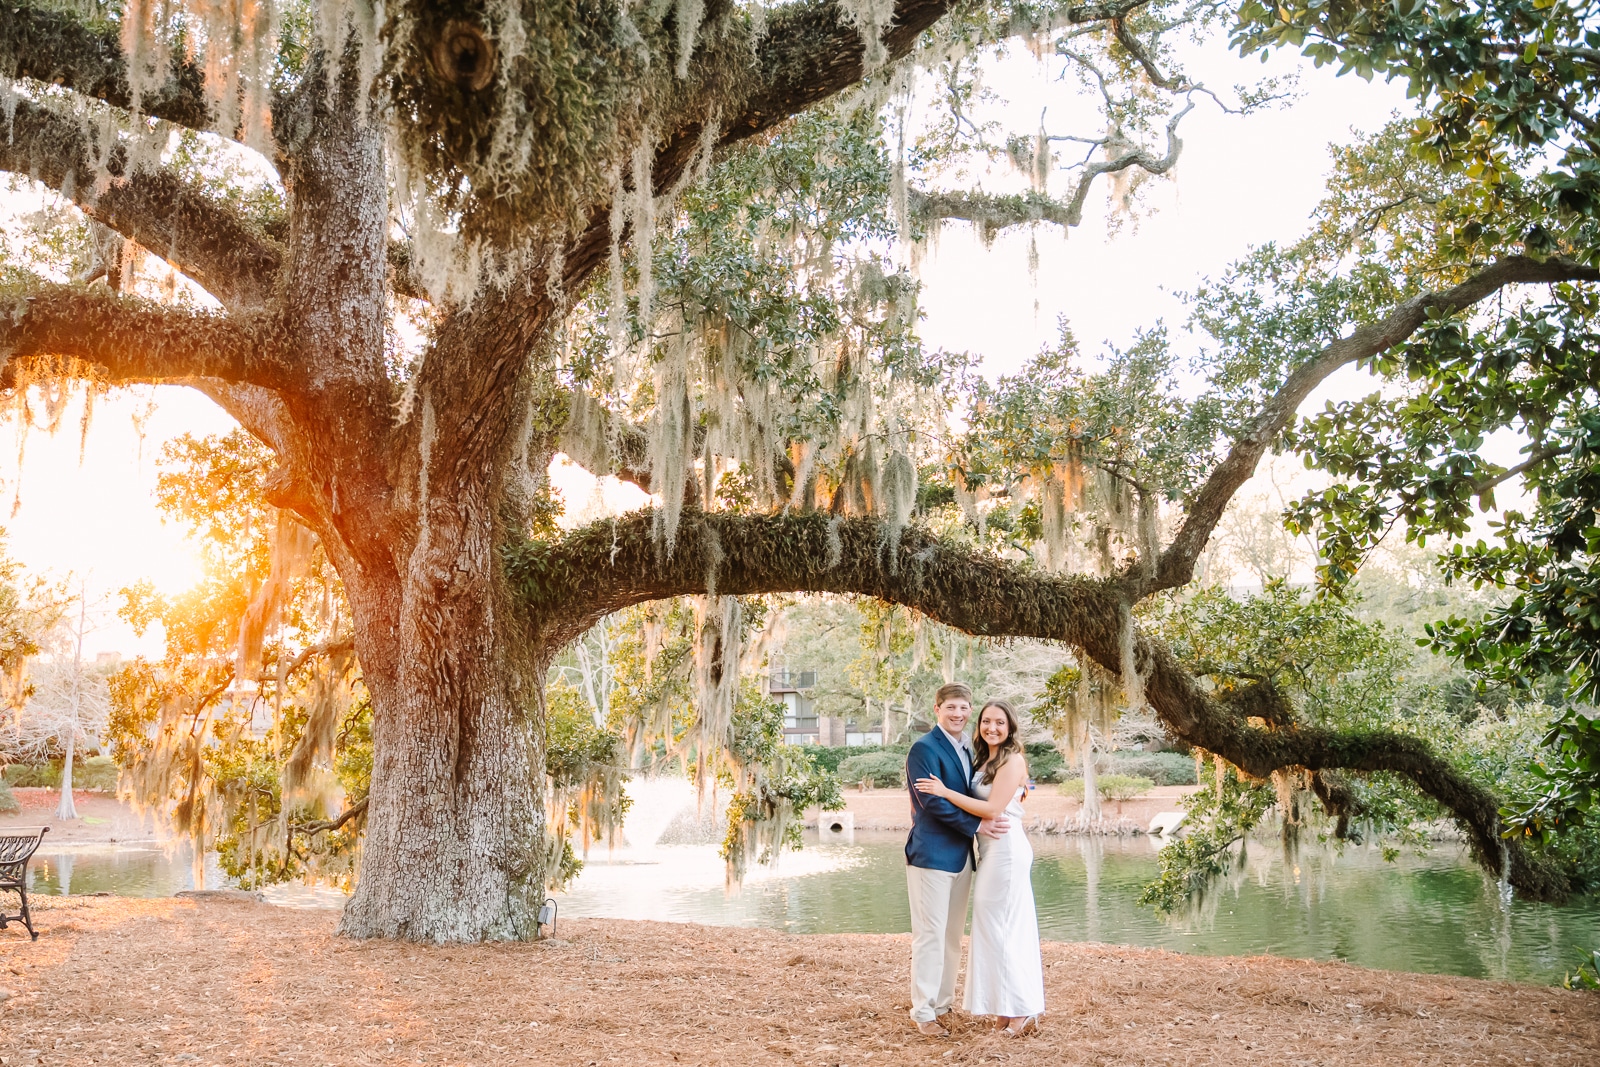 Bride and Groom engagement photos at The Grand Hotel in Fairhope Al